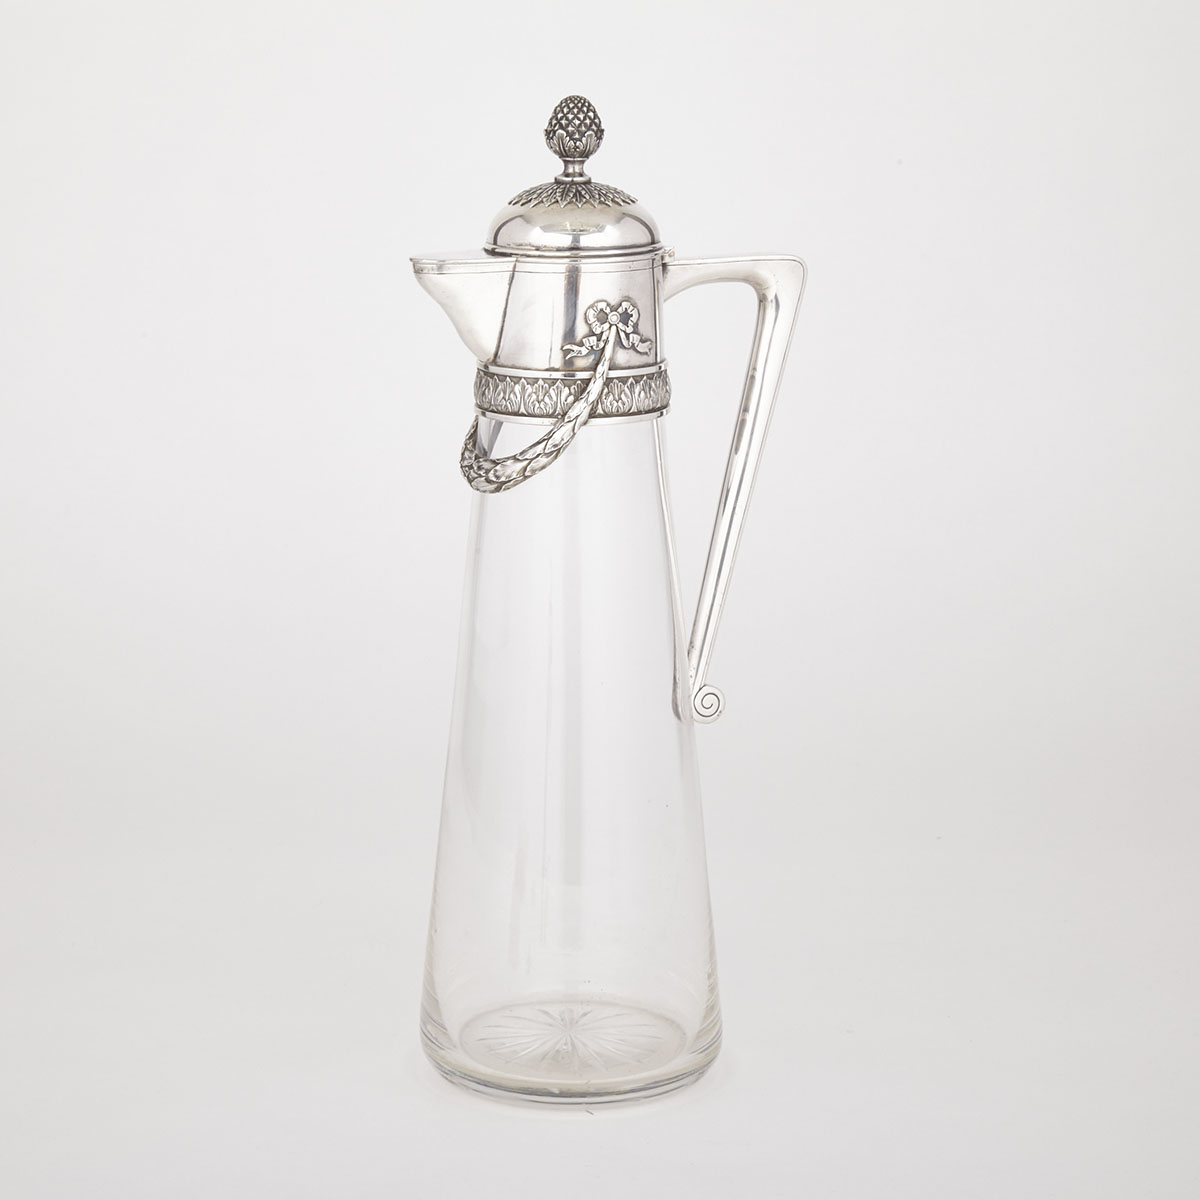 Russian Silver Mounted Glass Claret Jug, Karl Fabergé, Moscow, 1899-1908